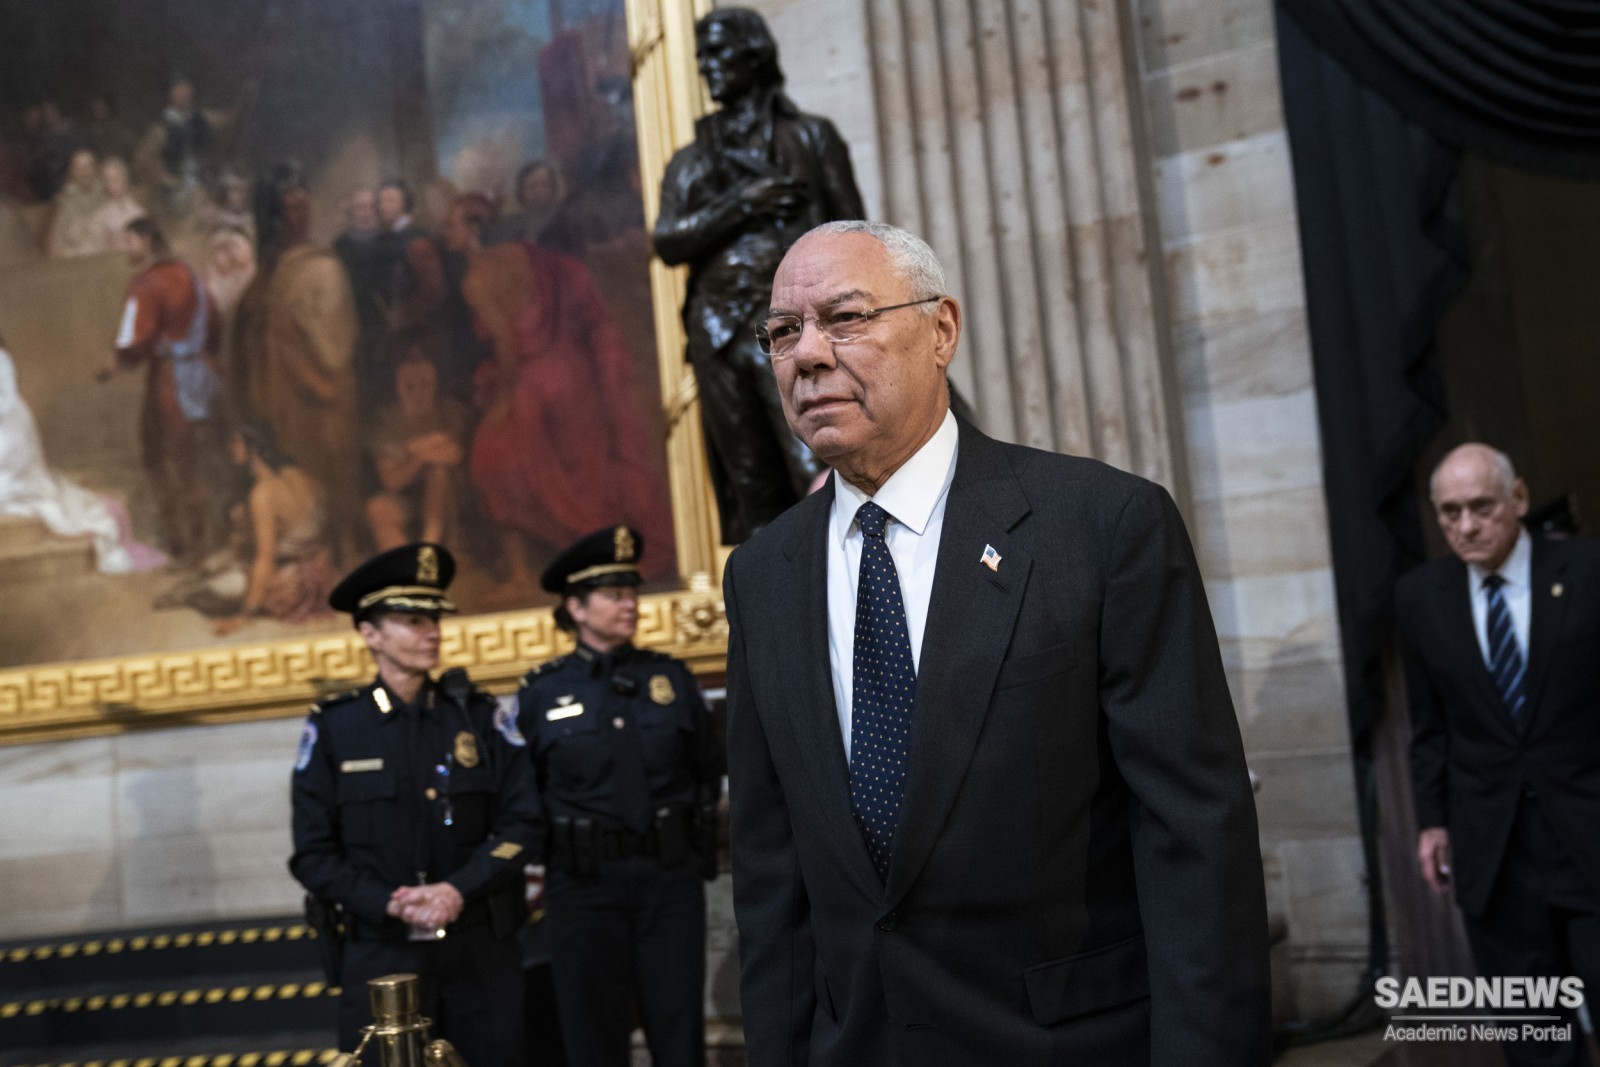 Colin Powell Dies at 84